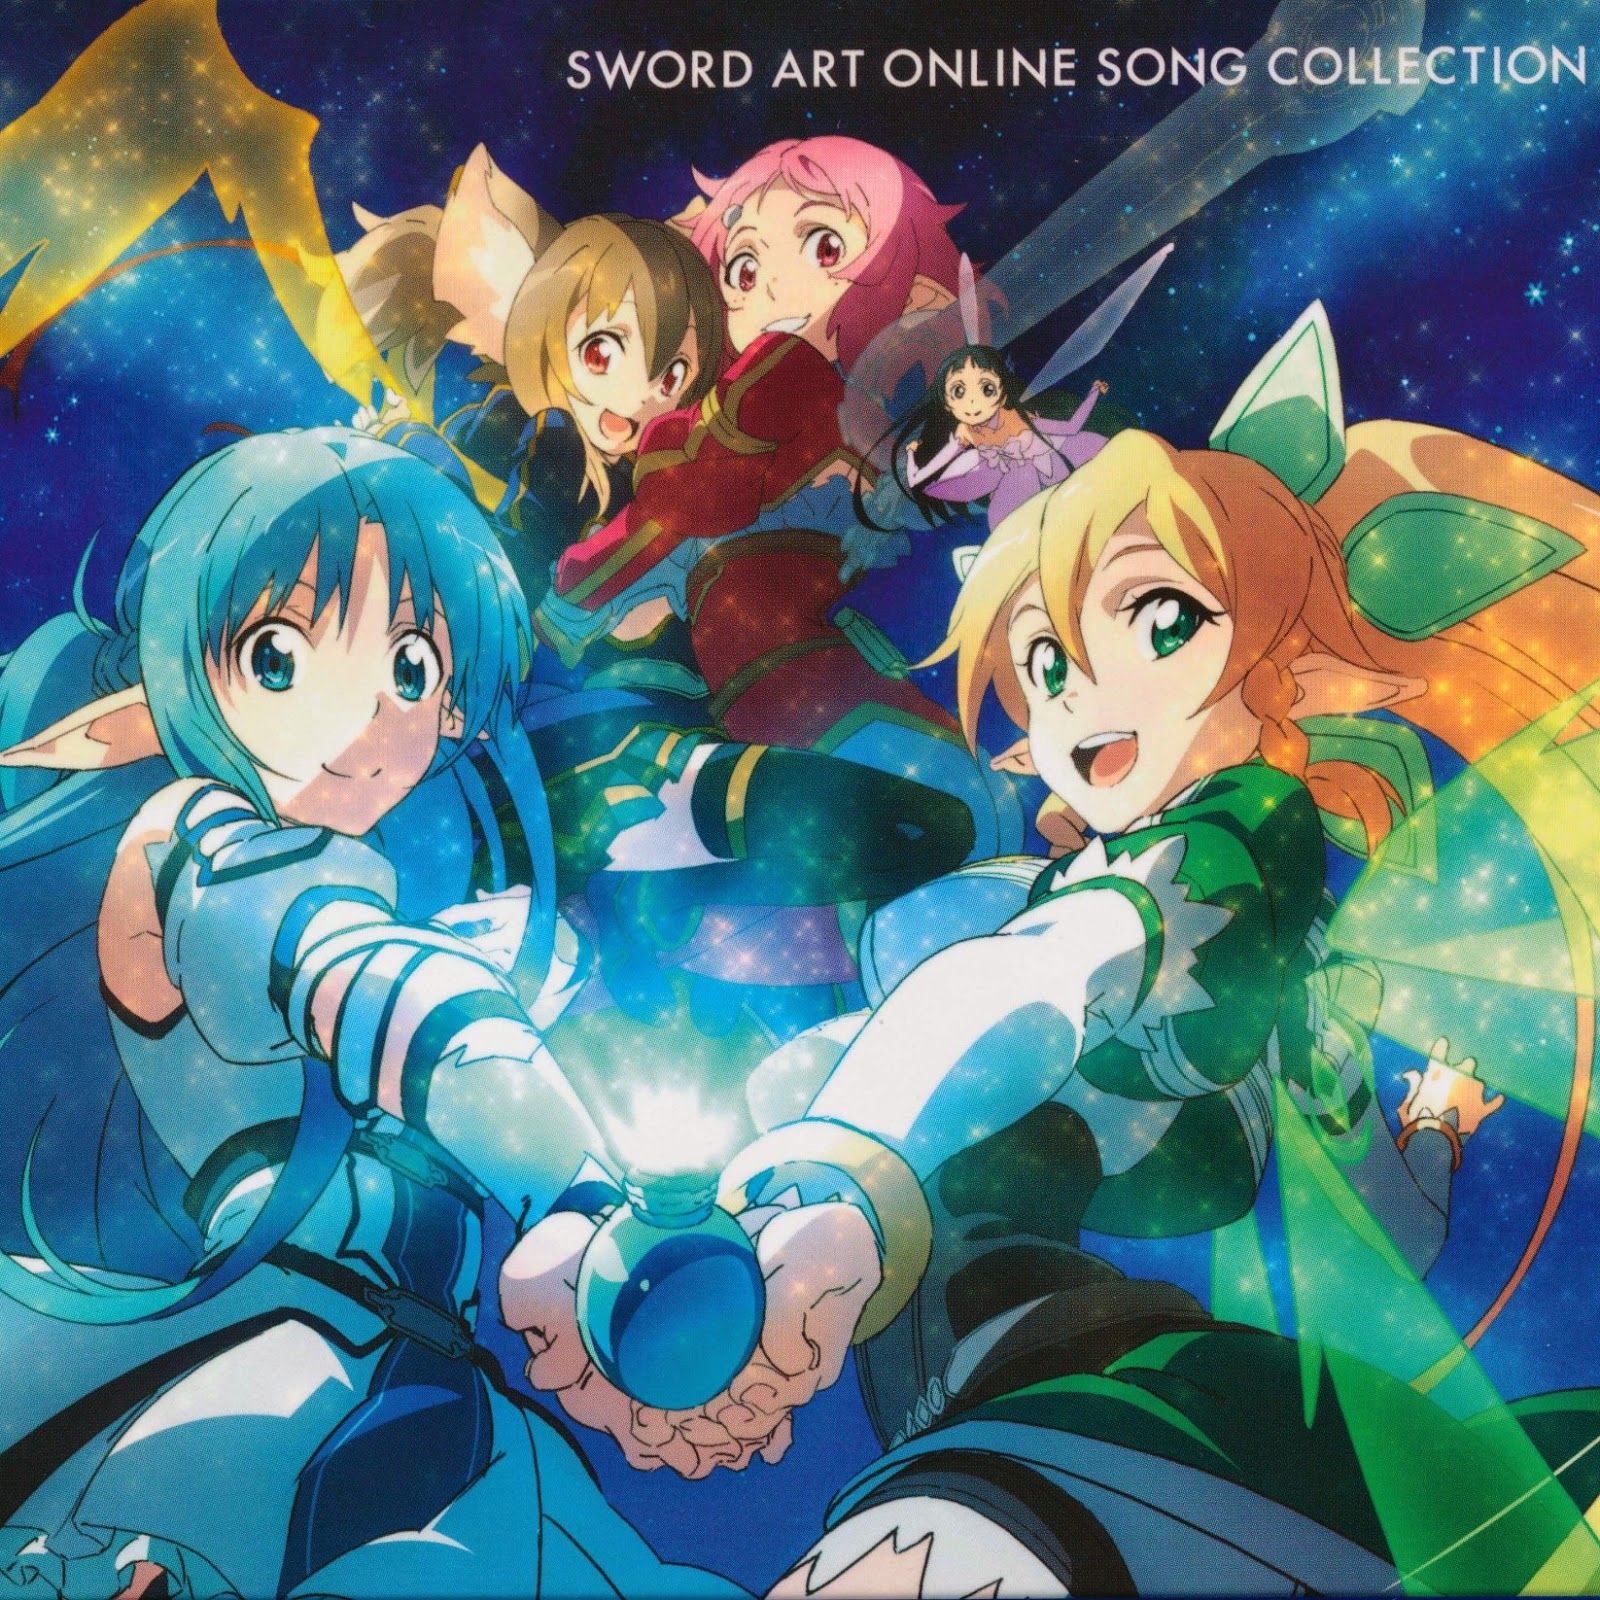 [ALBUM] Sword Art Online Song Collection (Limited Edition+CD EXTRA)